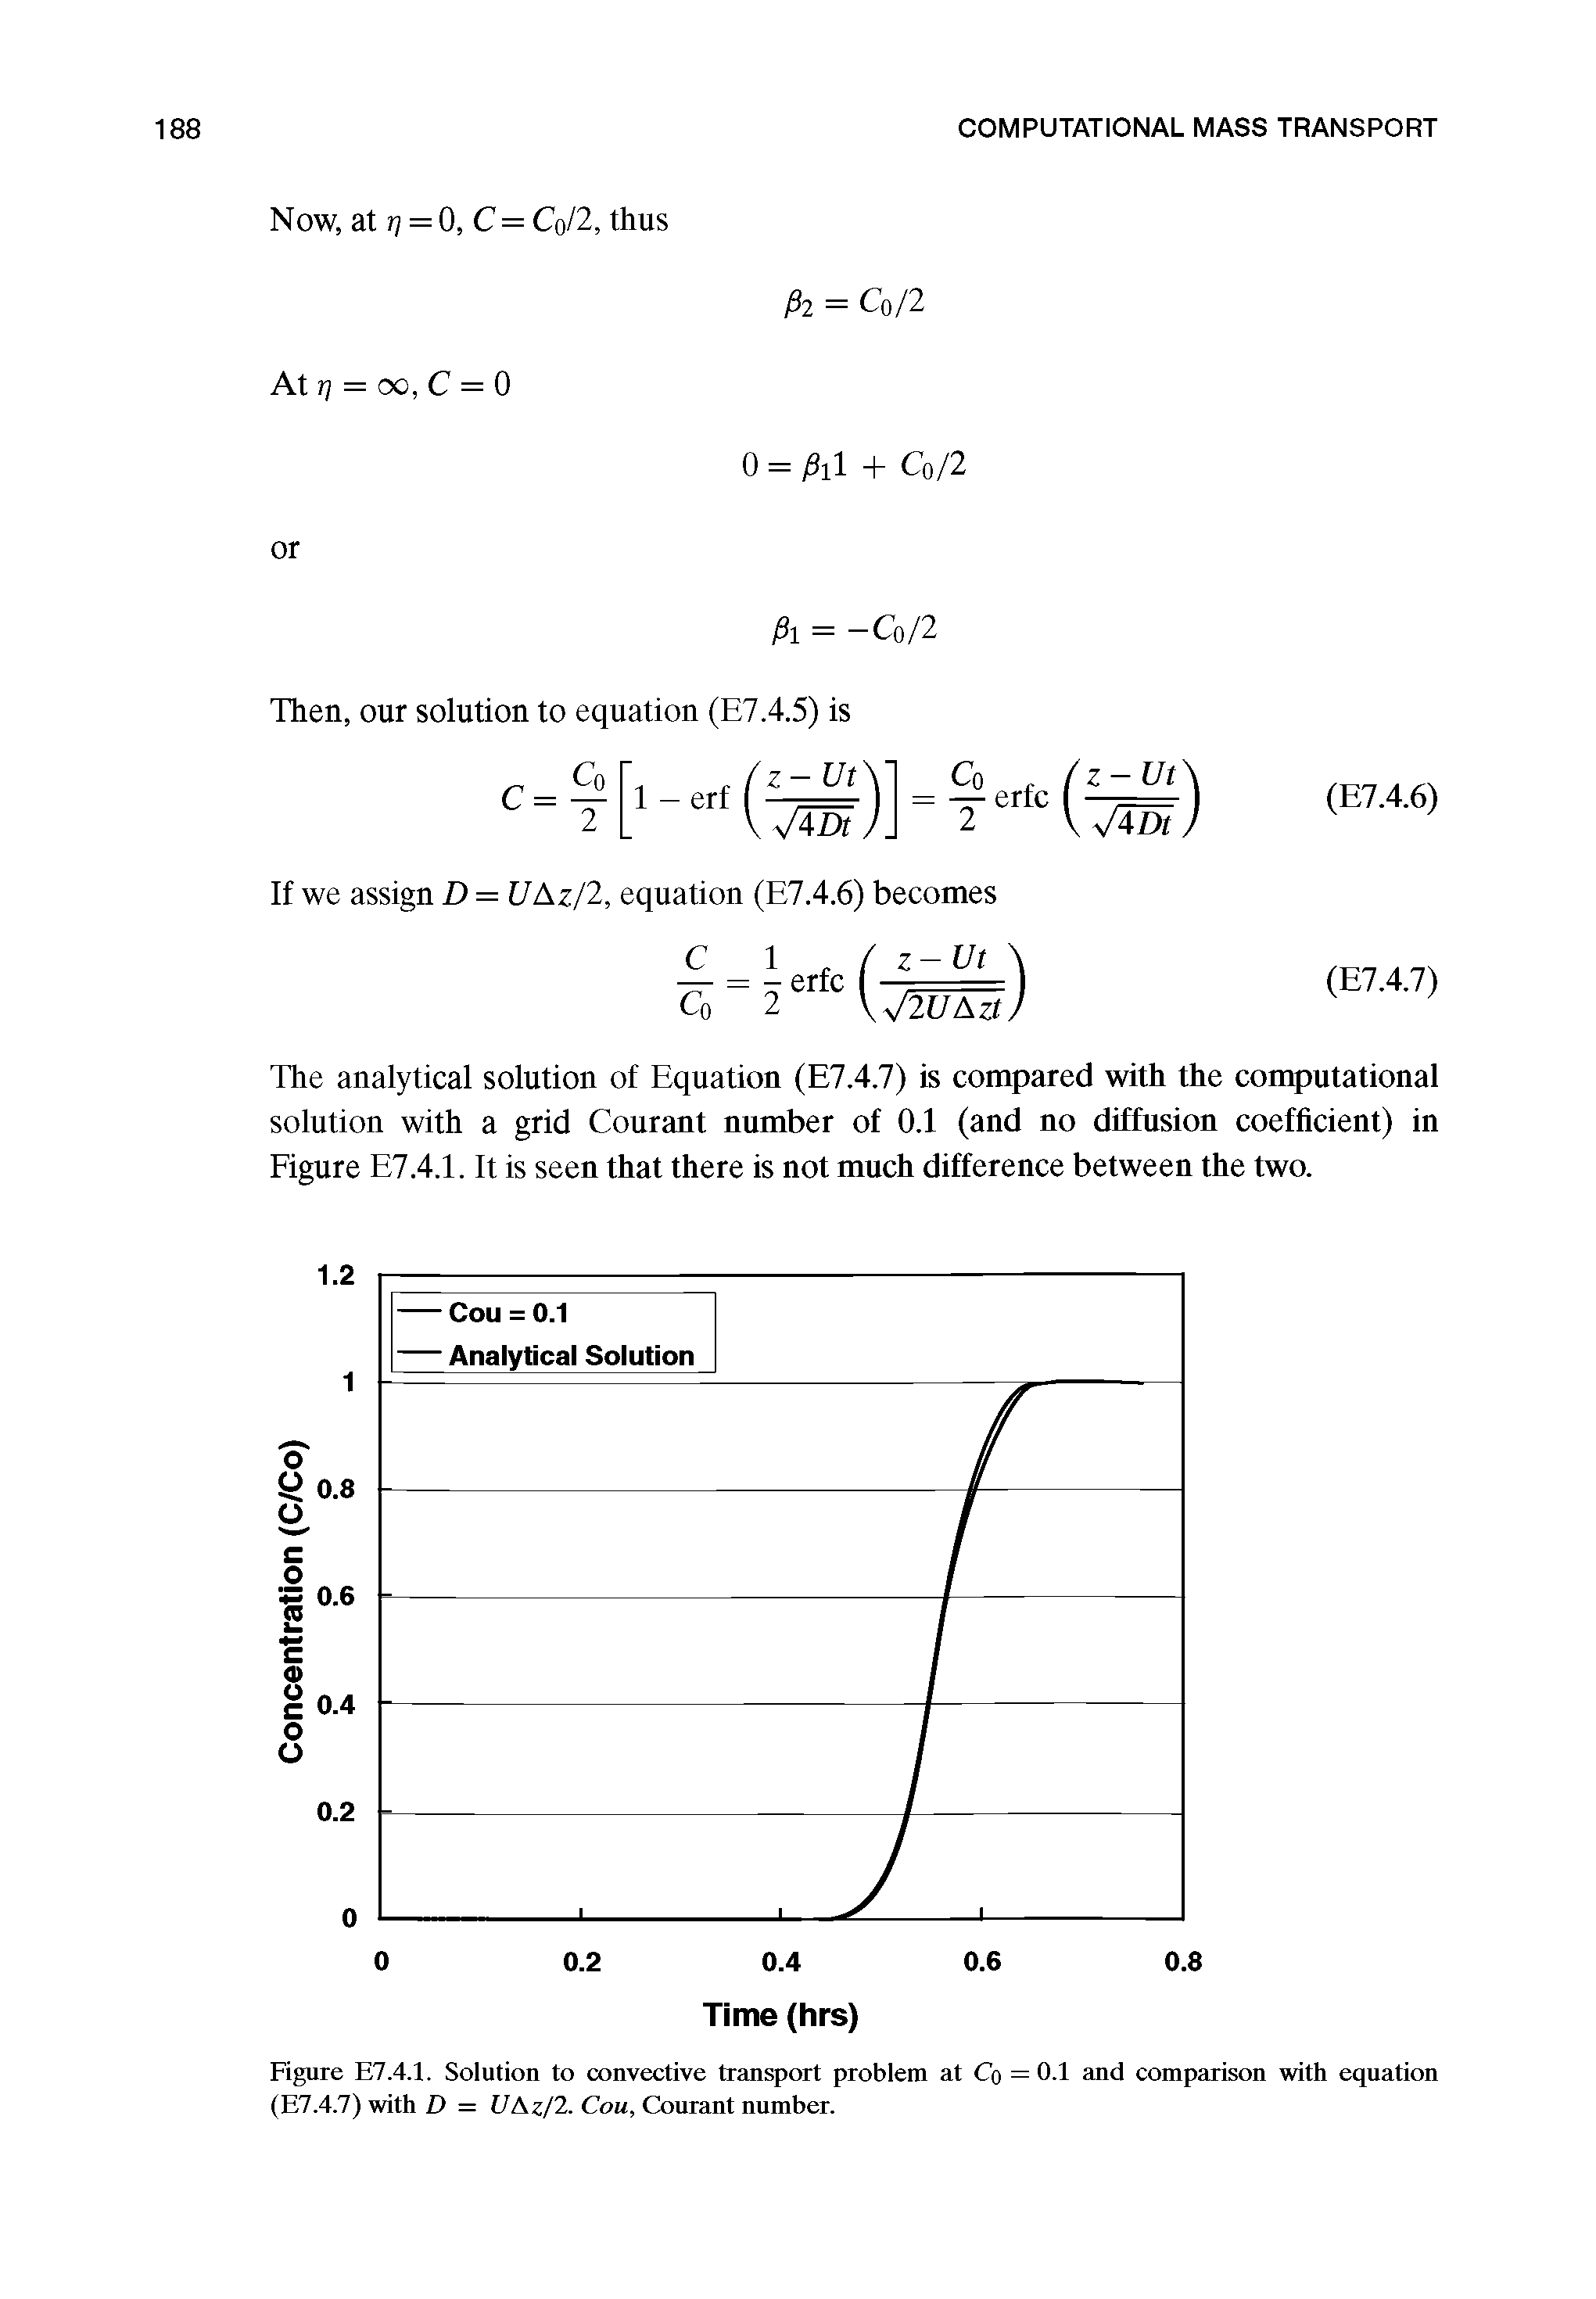 Figure E7.4.1. Solution to convective transport problem at Co = 0.1 and comparison with equation (E7.4.7) with D = U zl2. Cou, Courant number.